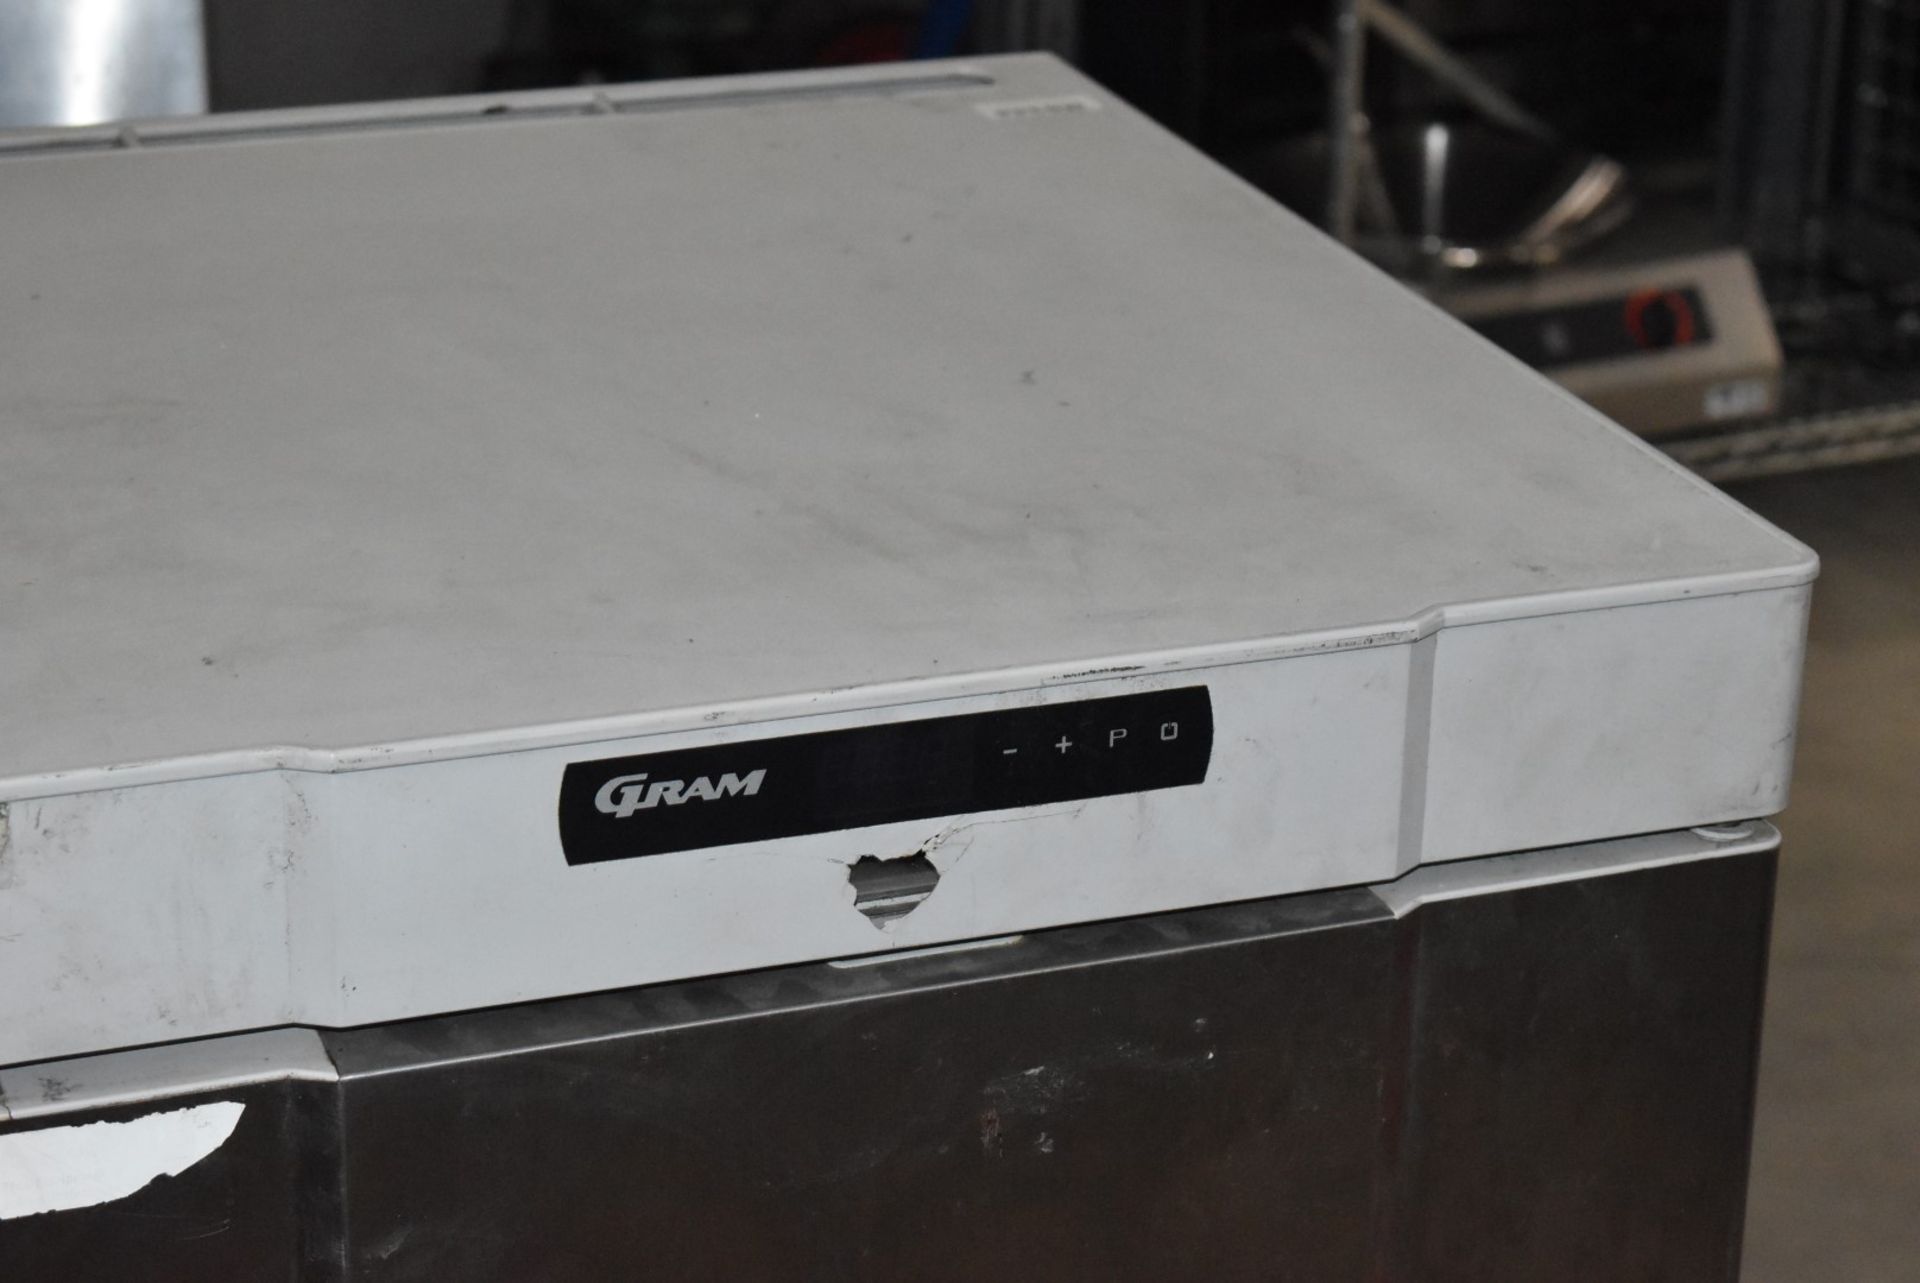 2 x Gram F 210 RG 3N 125 Ltr Undercounter Freezers - Recently Removed From a Restaurant - Image 4 of 8